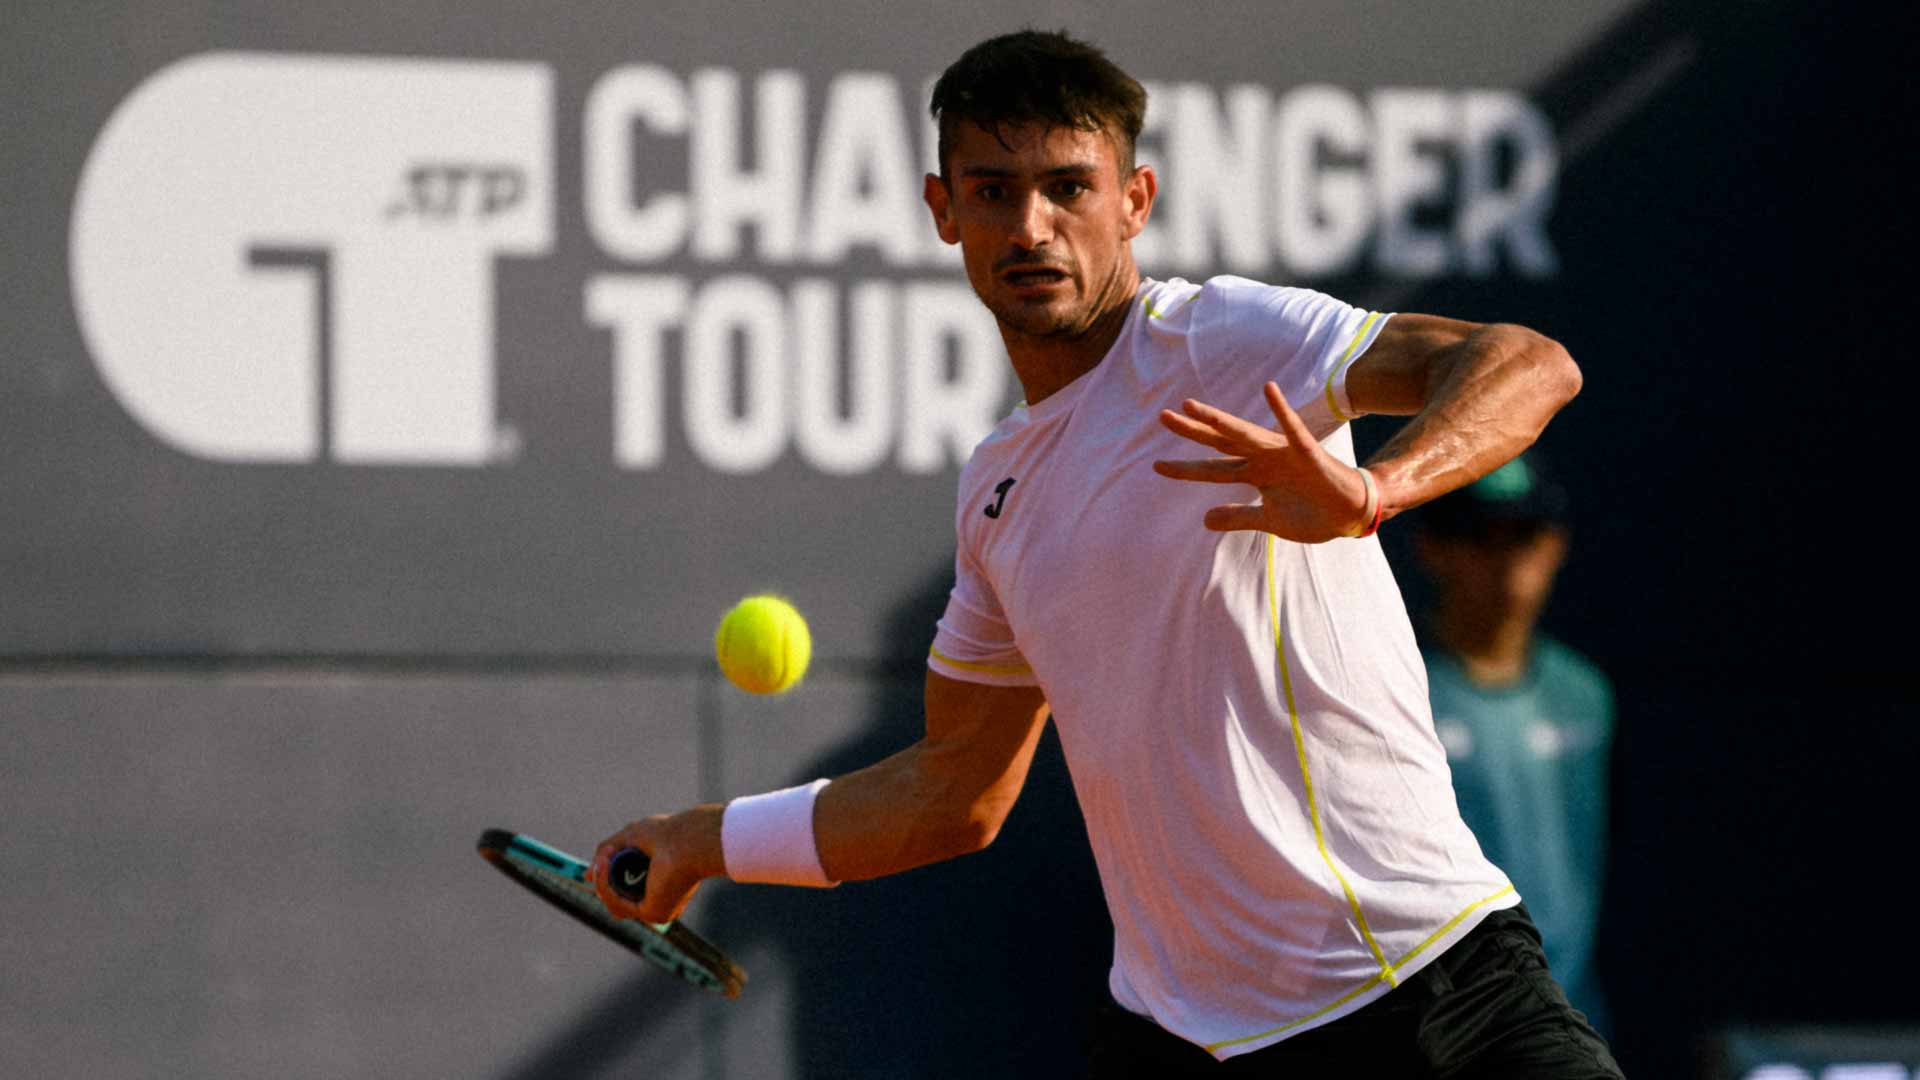 Five Challenger players to watch at Roland Garros